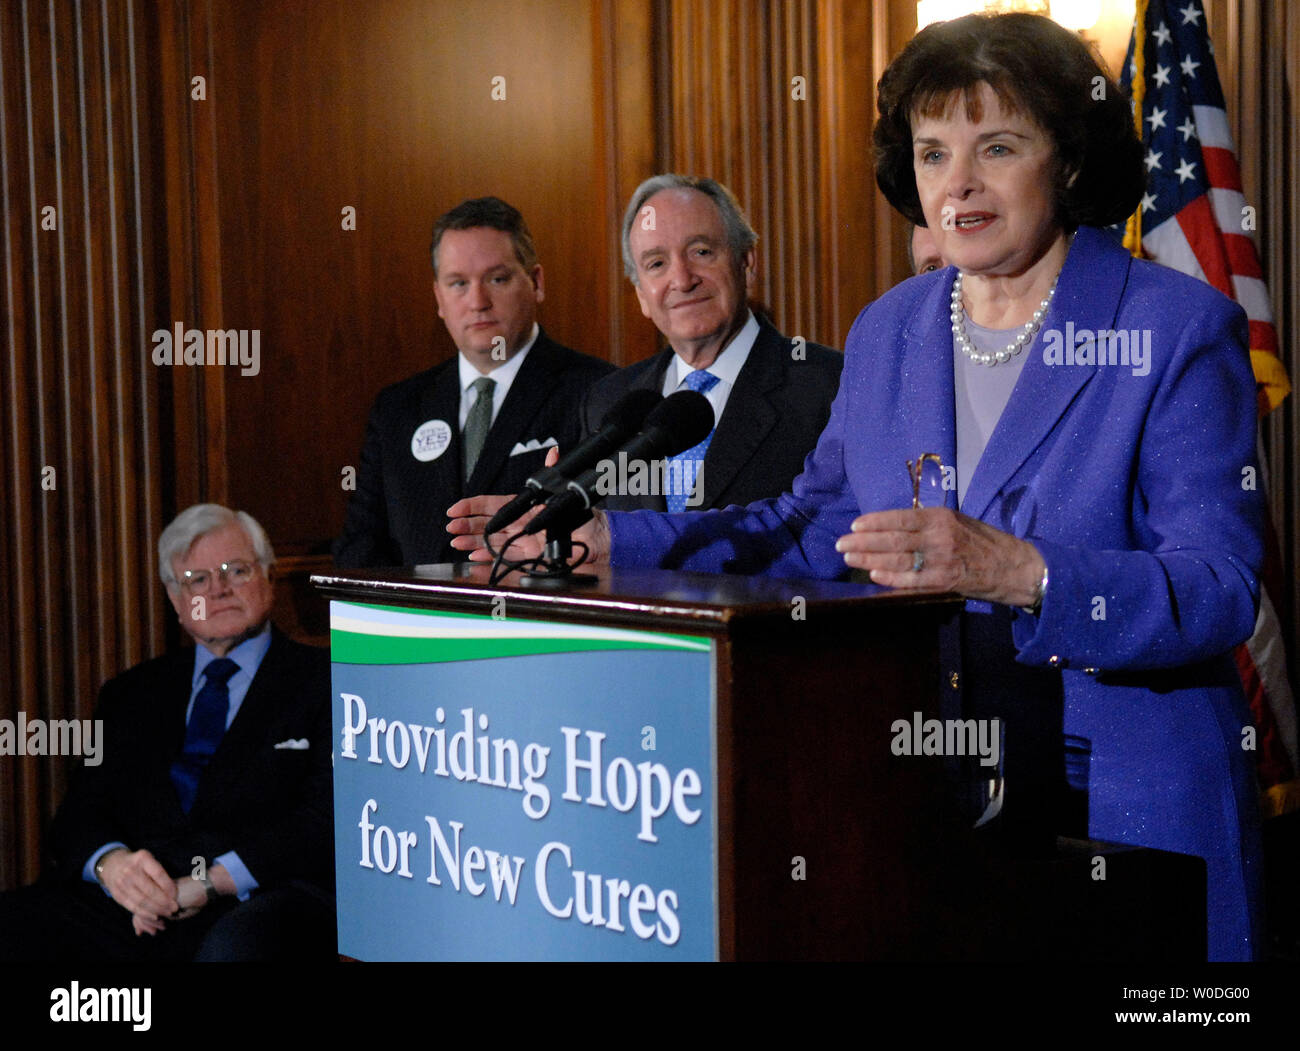 Sen. Dianne Feinstein (D-CA) (R) speaks on the upcoming Senate debate and vote on the Stem Cell Research Enhancement Act, at a press conference in Washington on April 10, 2007. The new legislation would allocate federal funding to stem cell research from donated embryos and would keep the harvesting off embryos illegal. Feinstein was joined by Sen. Tom Harkin (D-IA) (2nd-R), Sean Tipton President of the Coalition for the Advancement of Medical Research (2nd-L) and Sen. Edward Kennedy (D-MA) (L). (UPI Photo/Kevin Dietsch) Stock Photo